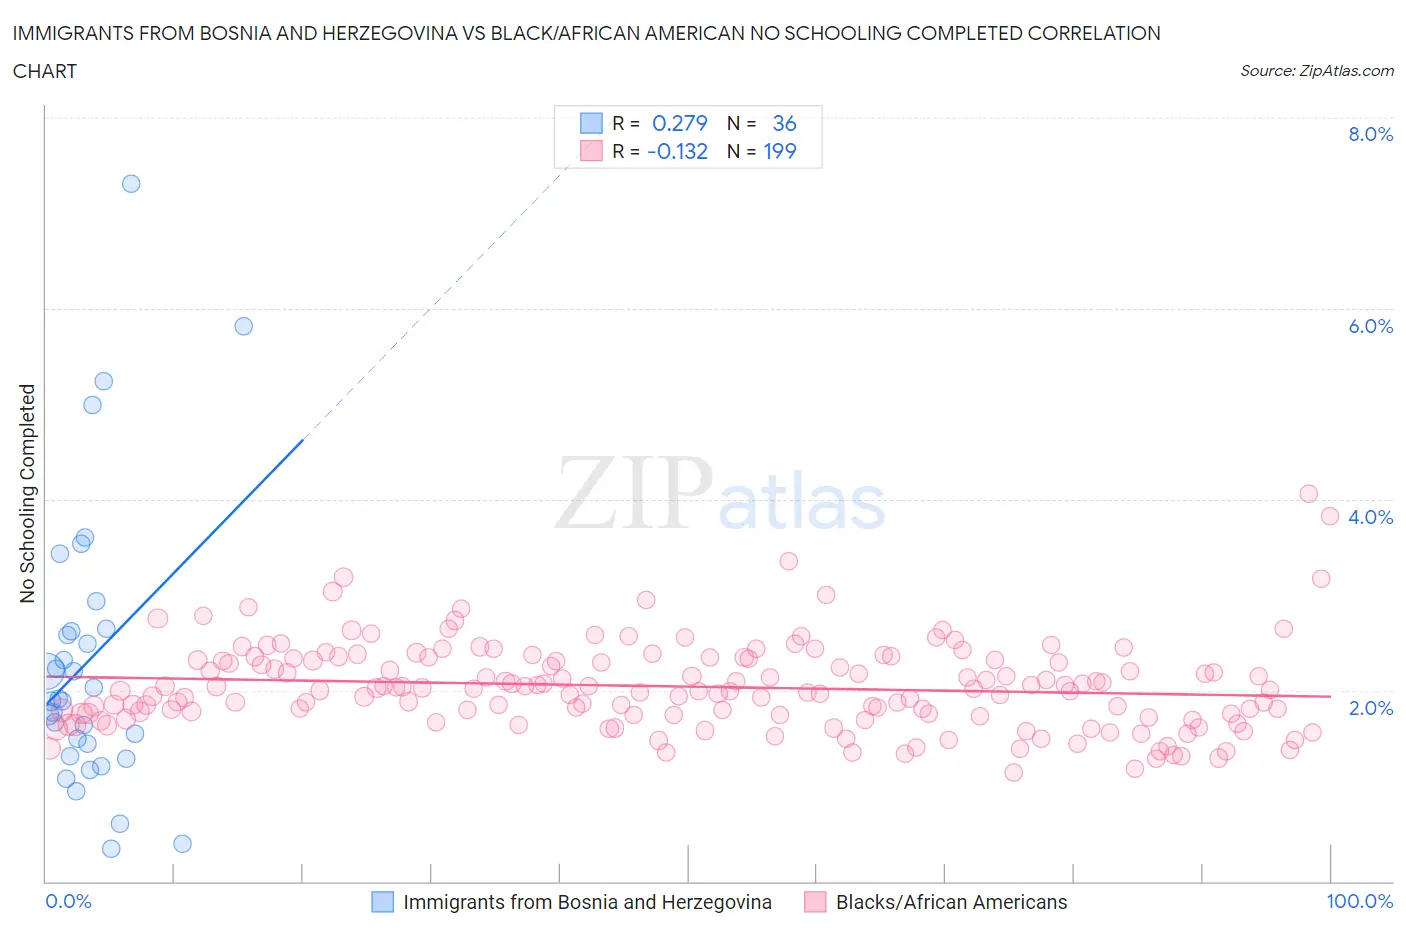 Immigrants from Bosnia and Herzegovina vs Black/African American No Schooling Completed